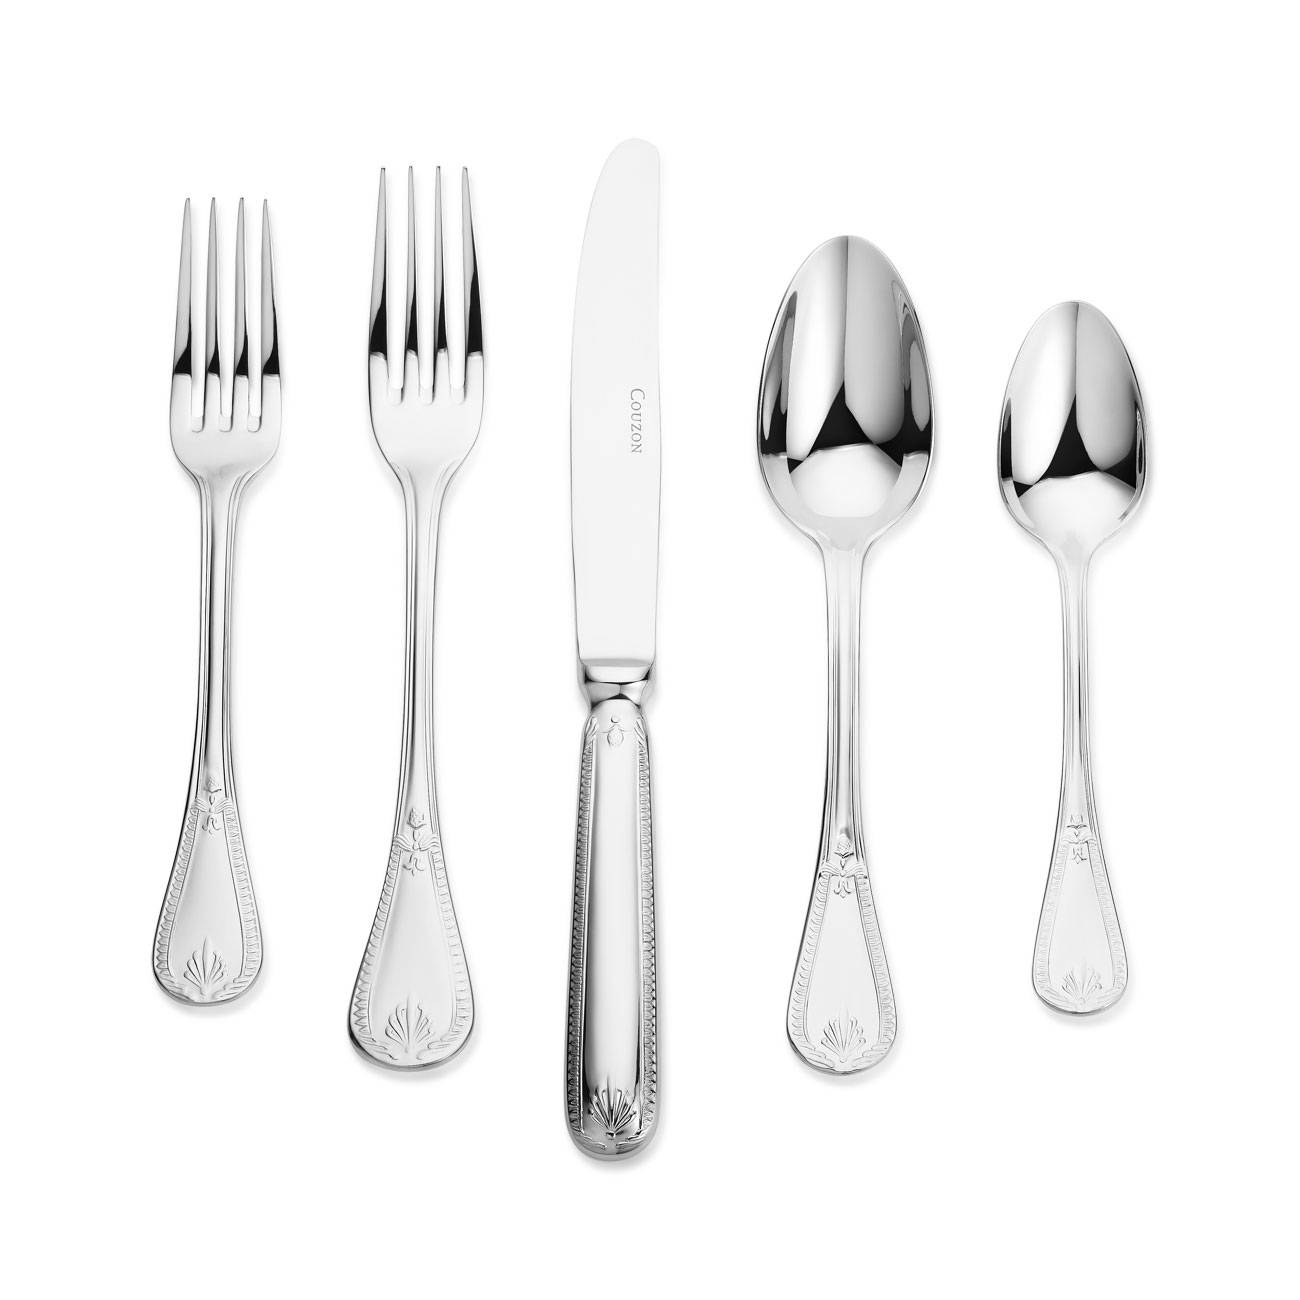 Consul Stainless Steel 5pc Place Setting